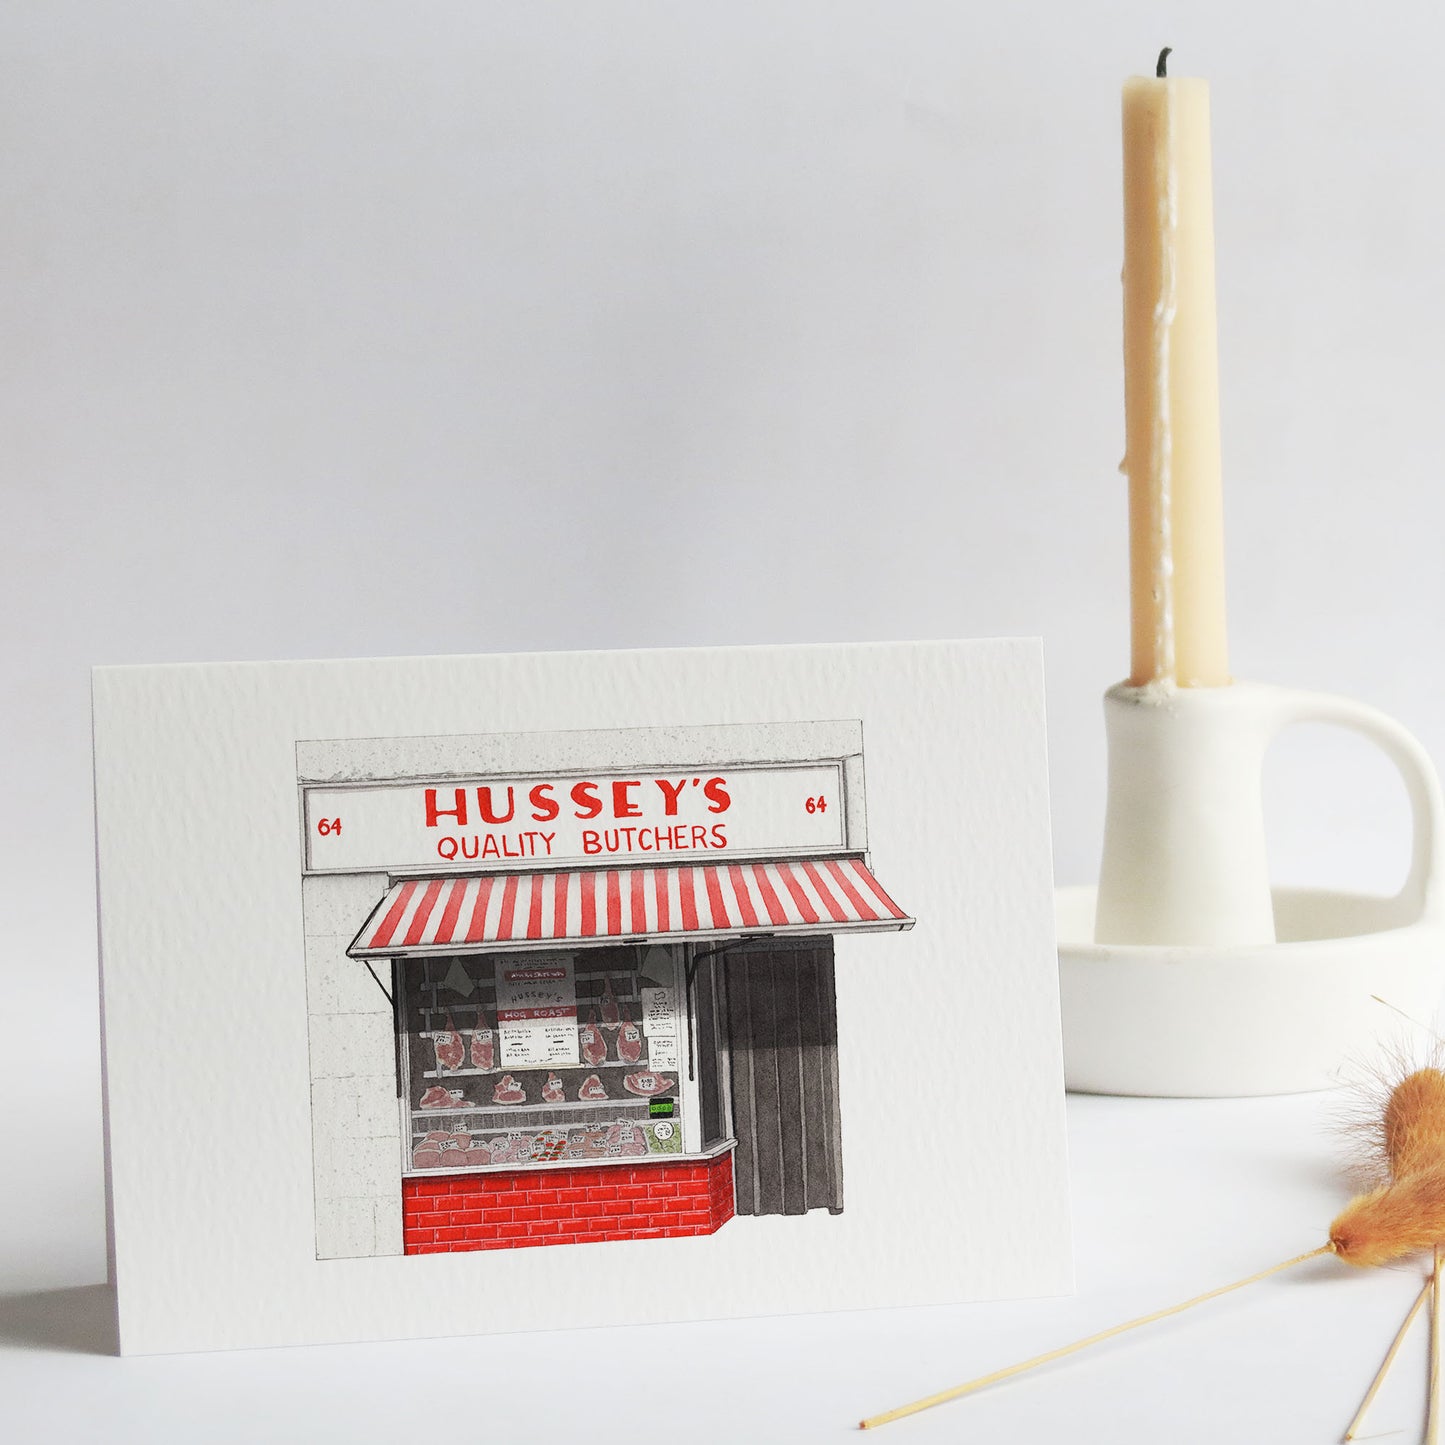 Wapping - Hussey's Quality Butchers - Greeting card with envelope